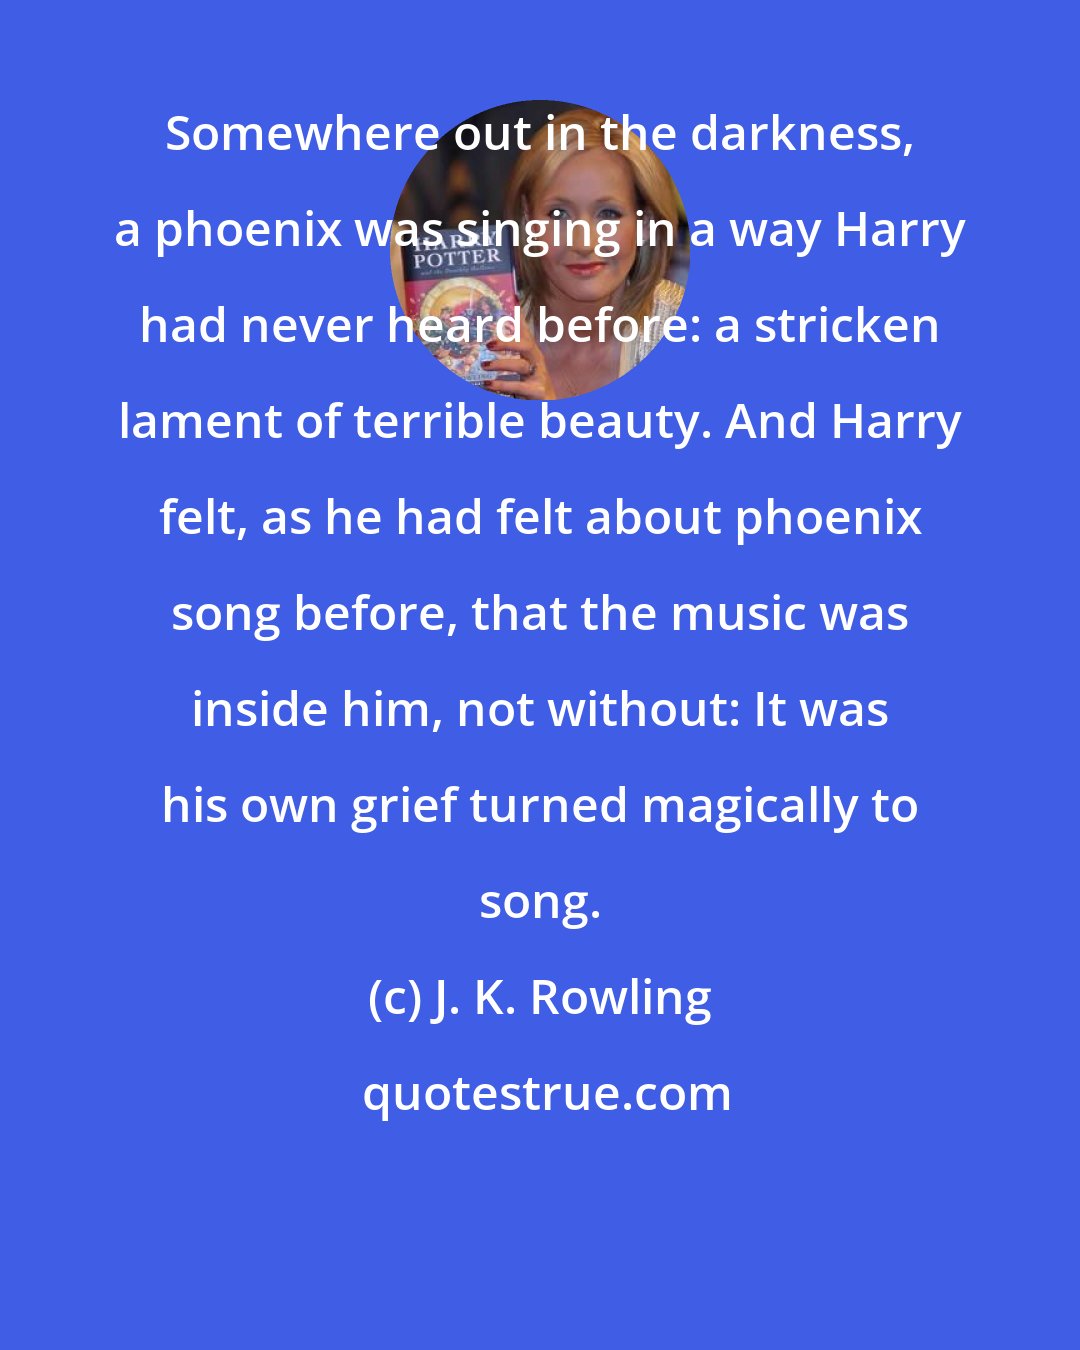 J. K. Rowling: Somewhere out in the darkness, a phoenix was singing in a way Harry had never heard before: a stricken lament of terrible beauty. And Harry felt, as he had felt about phoenix song before, that the music was inside him, not without: It was his own grief turned magically to song.